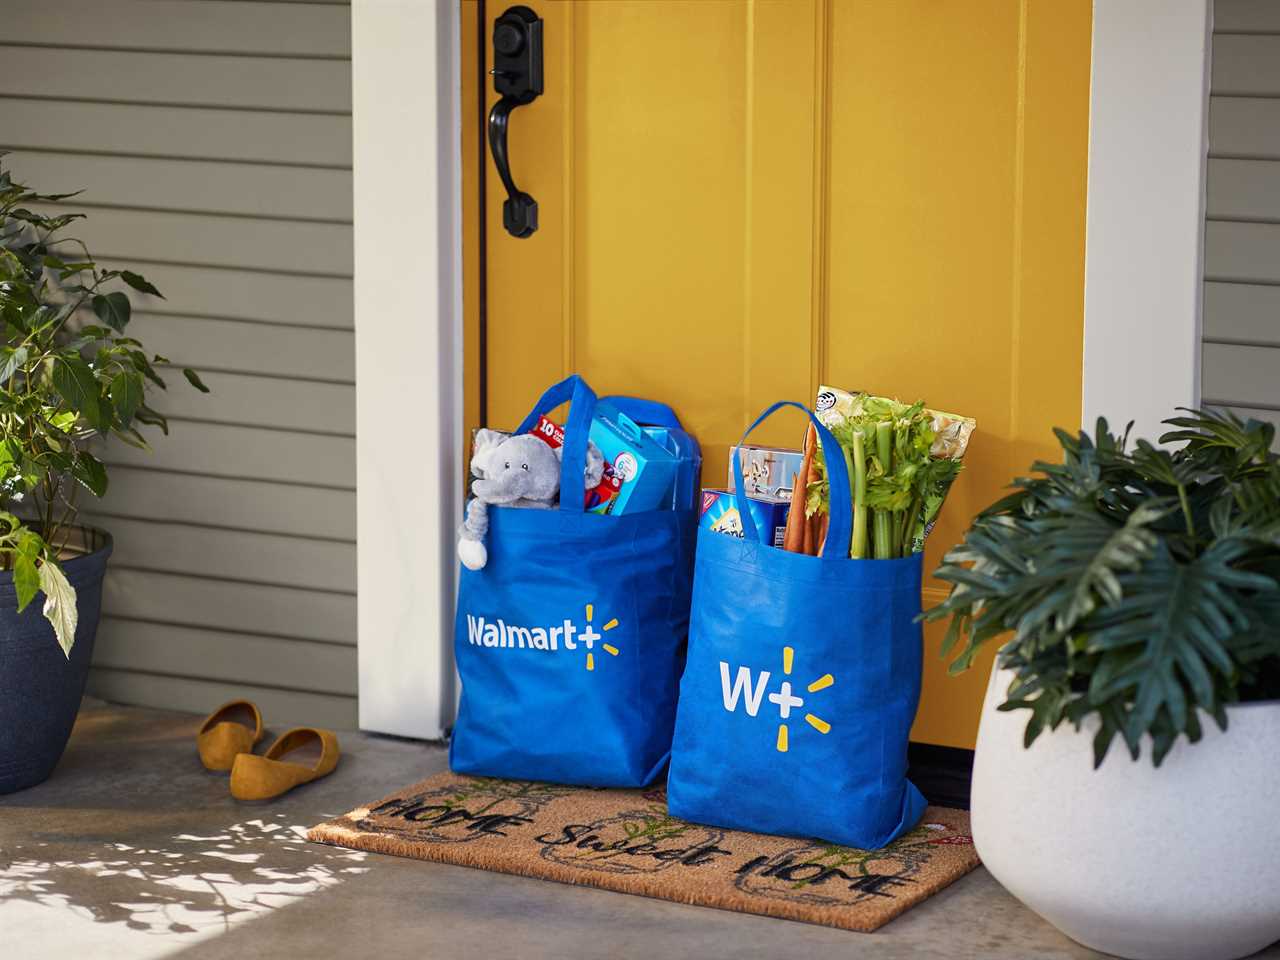 Two blue Walmart bags filled with groceries sitting on a doorstep.